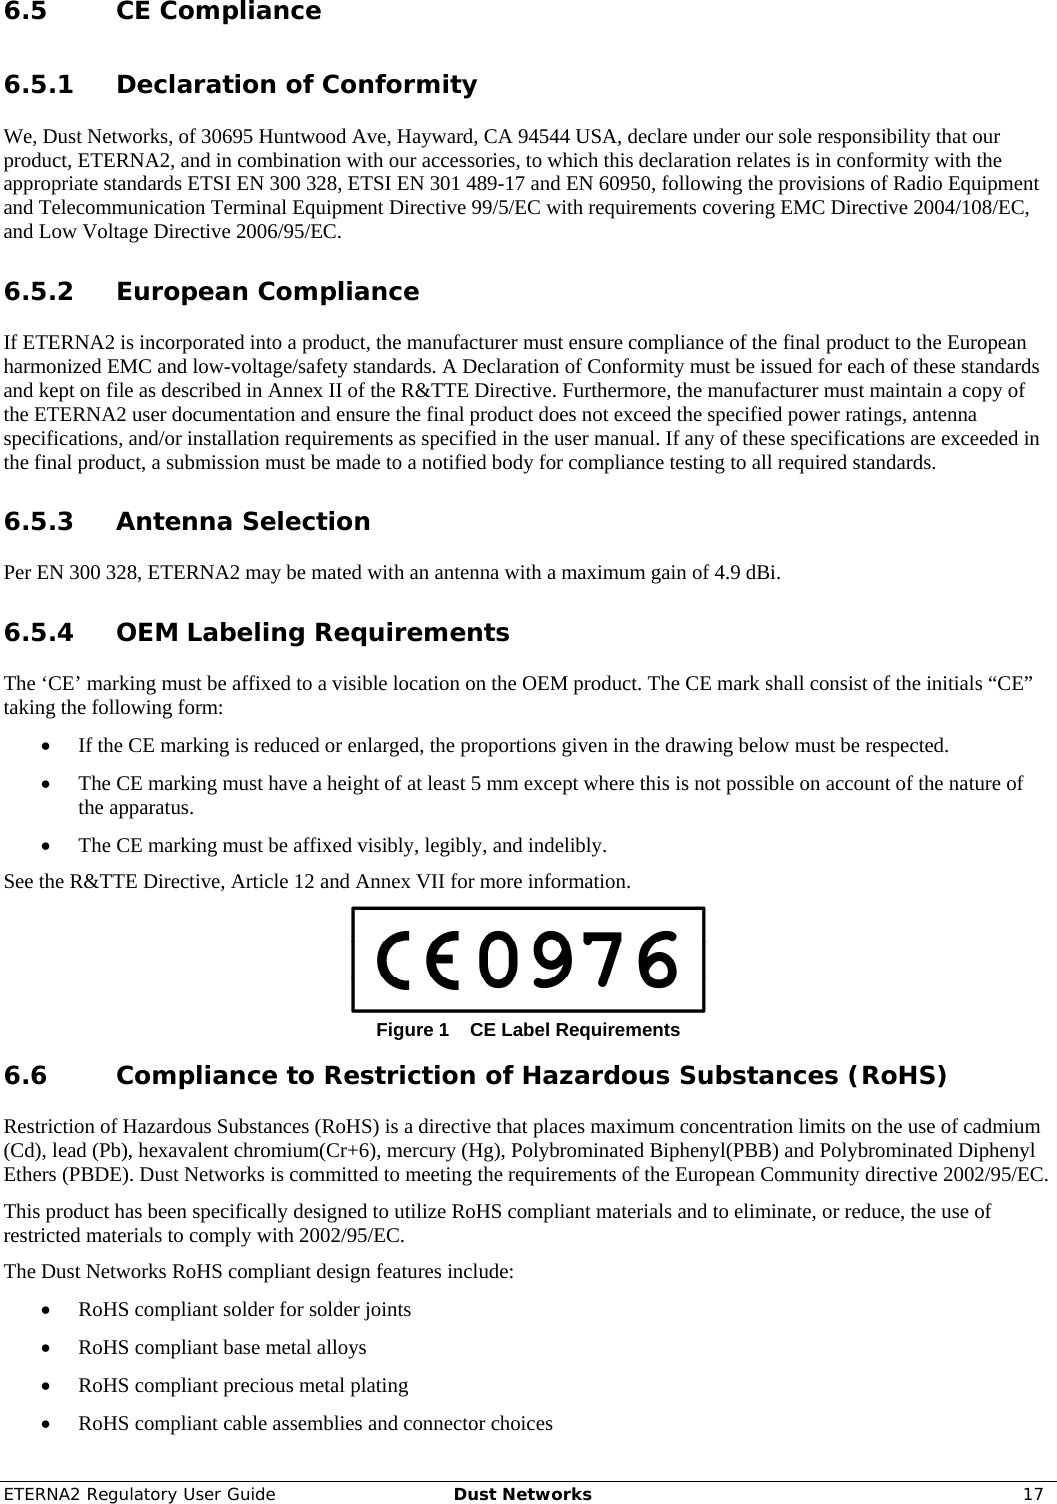 ETERNA2 Regulatory User Guide  Dust Networks  17  6.5 CE Compliance 6.5.1 Declaration of Conformity We, Dust Networks, of 30695 Huntwood Ave, Hayward, CA 94544 USA, declare under our sole responsibility that our product, ETERNA2, and in combination with our accessories, to which this declaration relates is in conformity with the appropriate standards ETSI EN 300 328, ETSI EN 301 489-17 and EN 60950, following the provisions of Radio Equipment and Telecommunication Terminal Equipment Directive 99/5/EC with requirements covering EMC Directive 2004/108/EC, and Low Voltage Directive 2006/95/EC. 6.5.2 European Compliance If ETERNA2 is incorporated into a product, the manufacturer must ensure compliance of the final product to the European harmonized EMC and low-voltage/safety standards. A Declaration of Conformity must be issued for each of these standards and kept on file as described in Annex II of the R&amp;TTE Directive. Furthermore, the manufacturer must maintain a copy of the ETERNA2 user documentation and ensure the final product does not exceed the specified power ratings, antenna specifications, and/or installation requirements as specified in the user manual. If any of these specifications are exceeded in the final product, a submission must be made to a notified body for compliance testing to all required standards. 6.5.3 Antenna Selection Per EN 300 328, ETERNA2 may be mated with an antenna with a maximum gain of 4.9 dBi. 6.5.4 OEM Labeling Requirements The ‘CE’ marking must be affixed to a visible location on the OEM product. The CE mark shall consist of the initials “CE” taking the following form: • If the CE marking is reduced or enlarged, the proportions given in the drawing below must be respected. • The CE marking must have a height of at least 5 mm except where this is not possible on account of the nature of the apparatus. • The CE marking must be affixed visibly, legibly, and indelibly. See the R&amp;TTE Directive, Article 12 and Annex VII for more information.  Figure 1  CE Label Requirements 6.6 Compliance to Restriction of Hazardous Substances (RoHS) Restriction of Hazardous Substances (RoHS) is a directive that places maximum concentration limits on the use of cadmium (Cd), lead (Pb), hexavalent chromium(Cr+6), mercury (Hg), Polybrominated Biphenyl(PBB) and Polybrominated Diphenyl Ethers (PBDE). Dust Networks is committed to meeting the requirements of the European Community directive 2002/95/EC.  This product has been specifically designed to utilize RoHS compliant materials and to eliminate, or reduce, the use of restricted materials to comply with 2002/95/EC. The Dust Networks RoHS compliant design features include: • RoHS compliant solder for solder joints  • RoHS compliant base metal alloys  • RoHS compliant precious metal plating • RoHS compliant cable assemblies and connector choices 